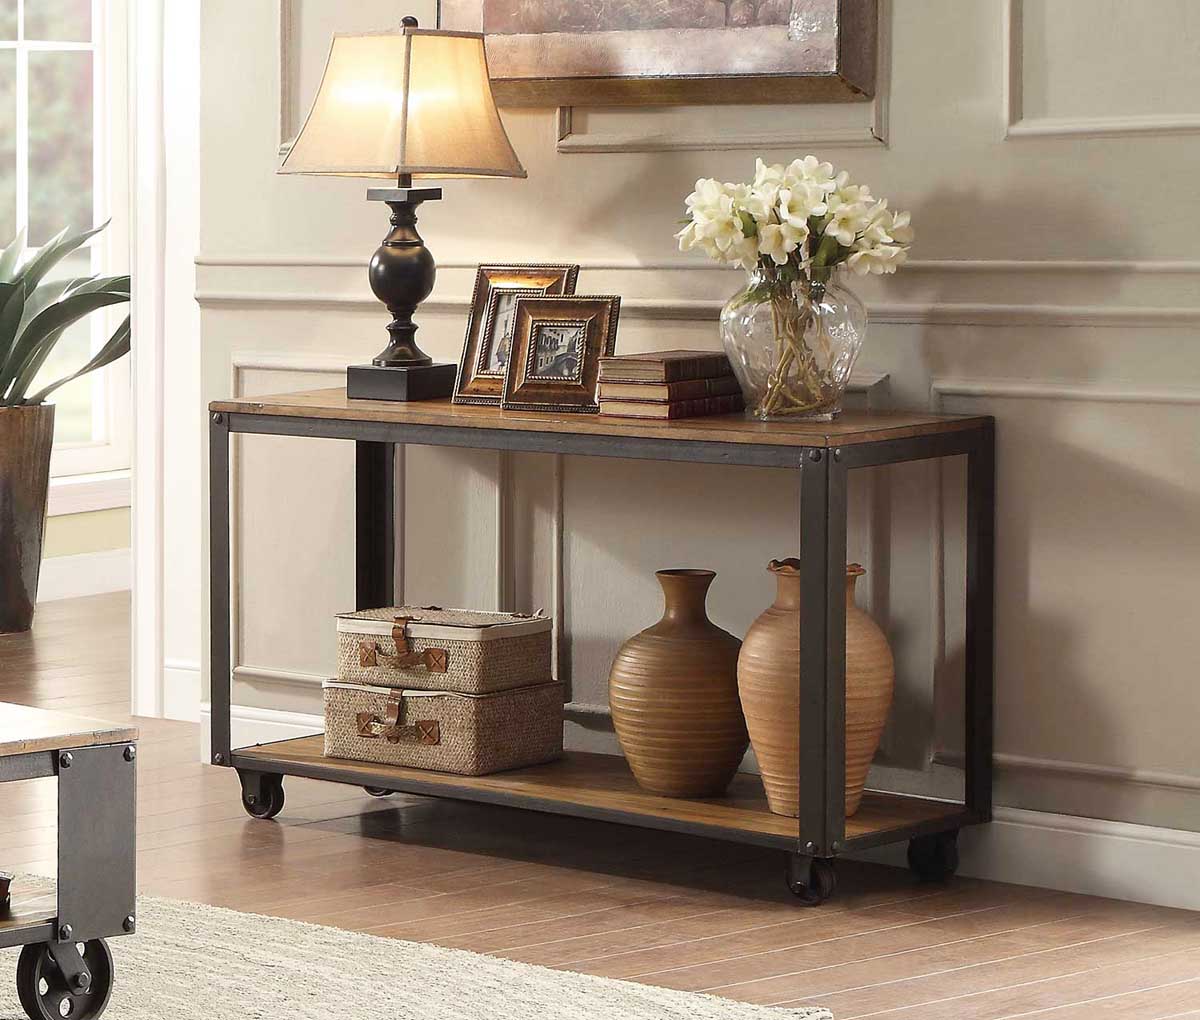 Console Tables for Sale in Kampala Uganda. Console tables provide a space for table lamps and displays of decorative pieces and artwork and, they can fit into narrow areas like halls and entryways as well as into dining rooms and living rooms. Ugabox